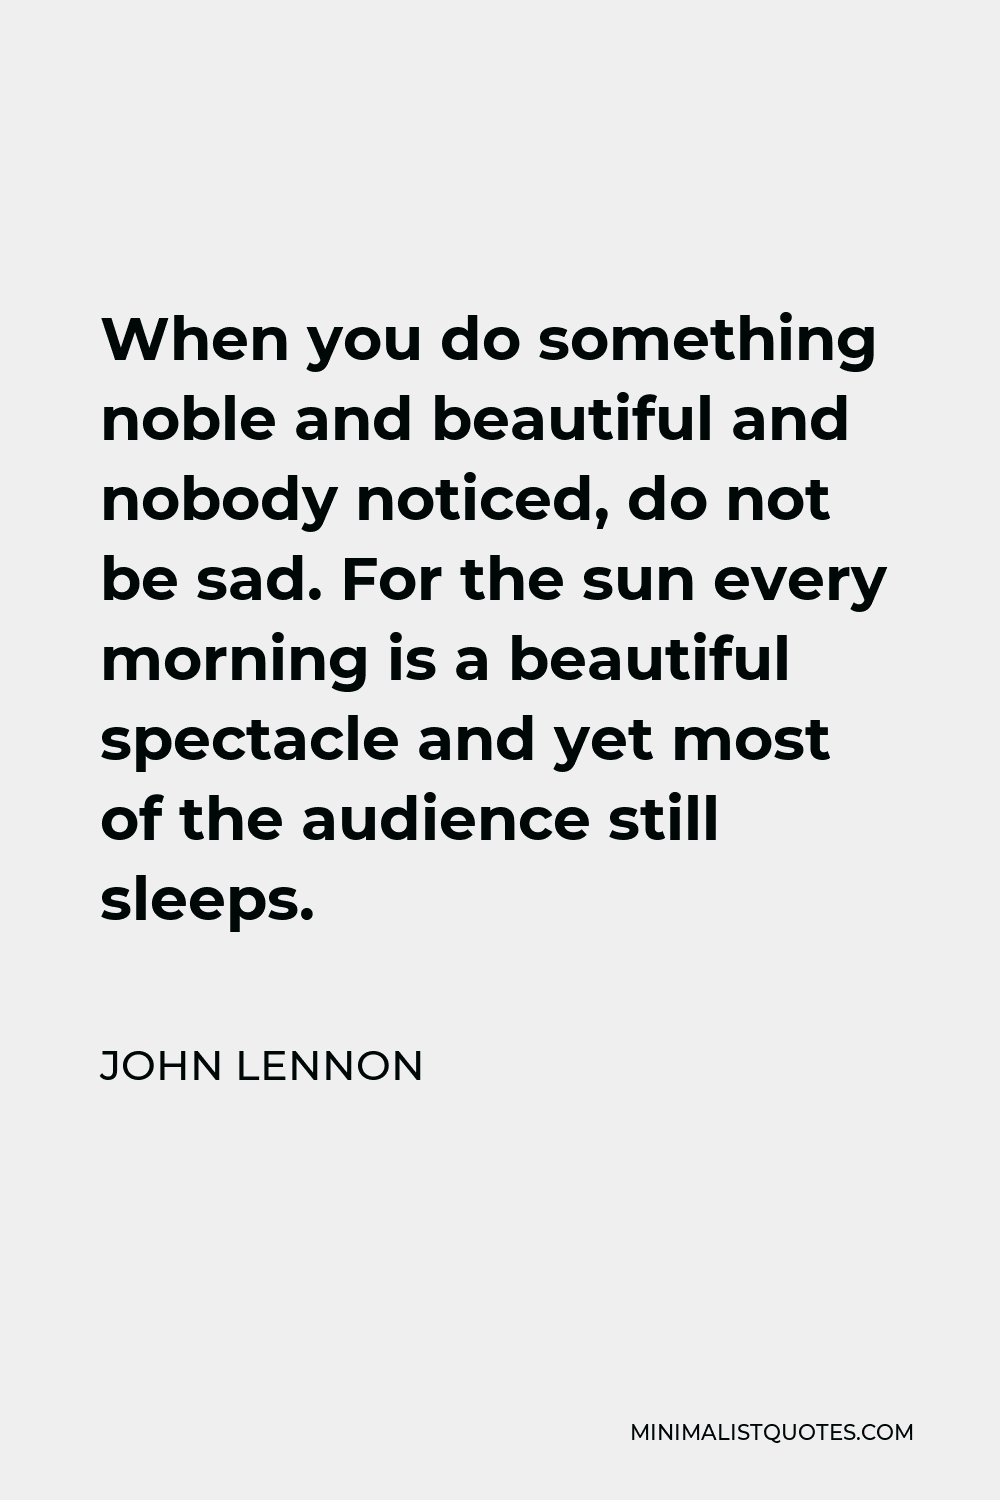 John Lennon Quote - When you do something noble and beautiful and nobody noticed, do not be sad. For the sun every morning is a beautiful spectacle and yet most of the audience still sleeps.